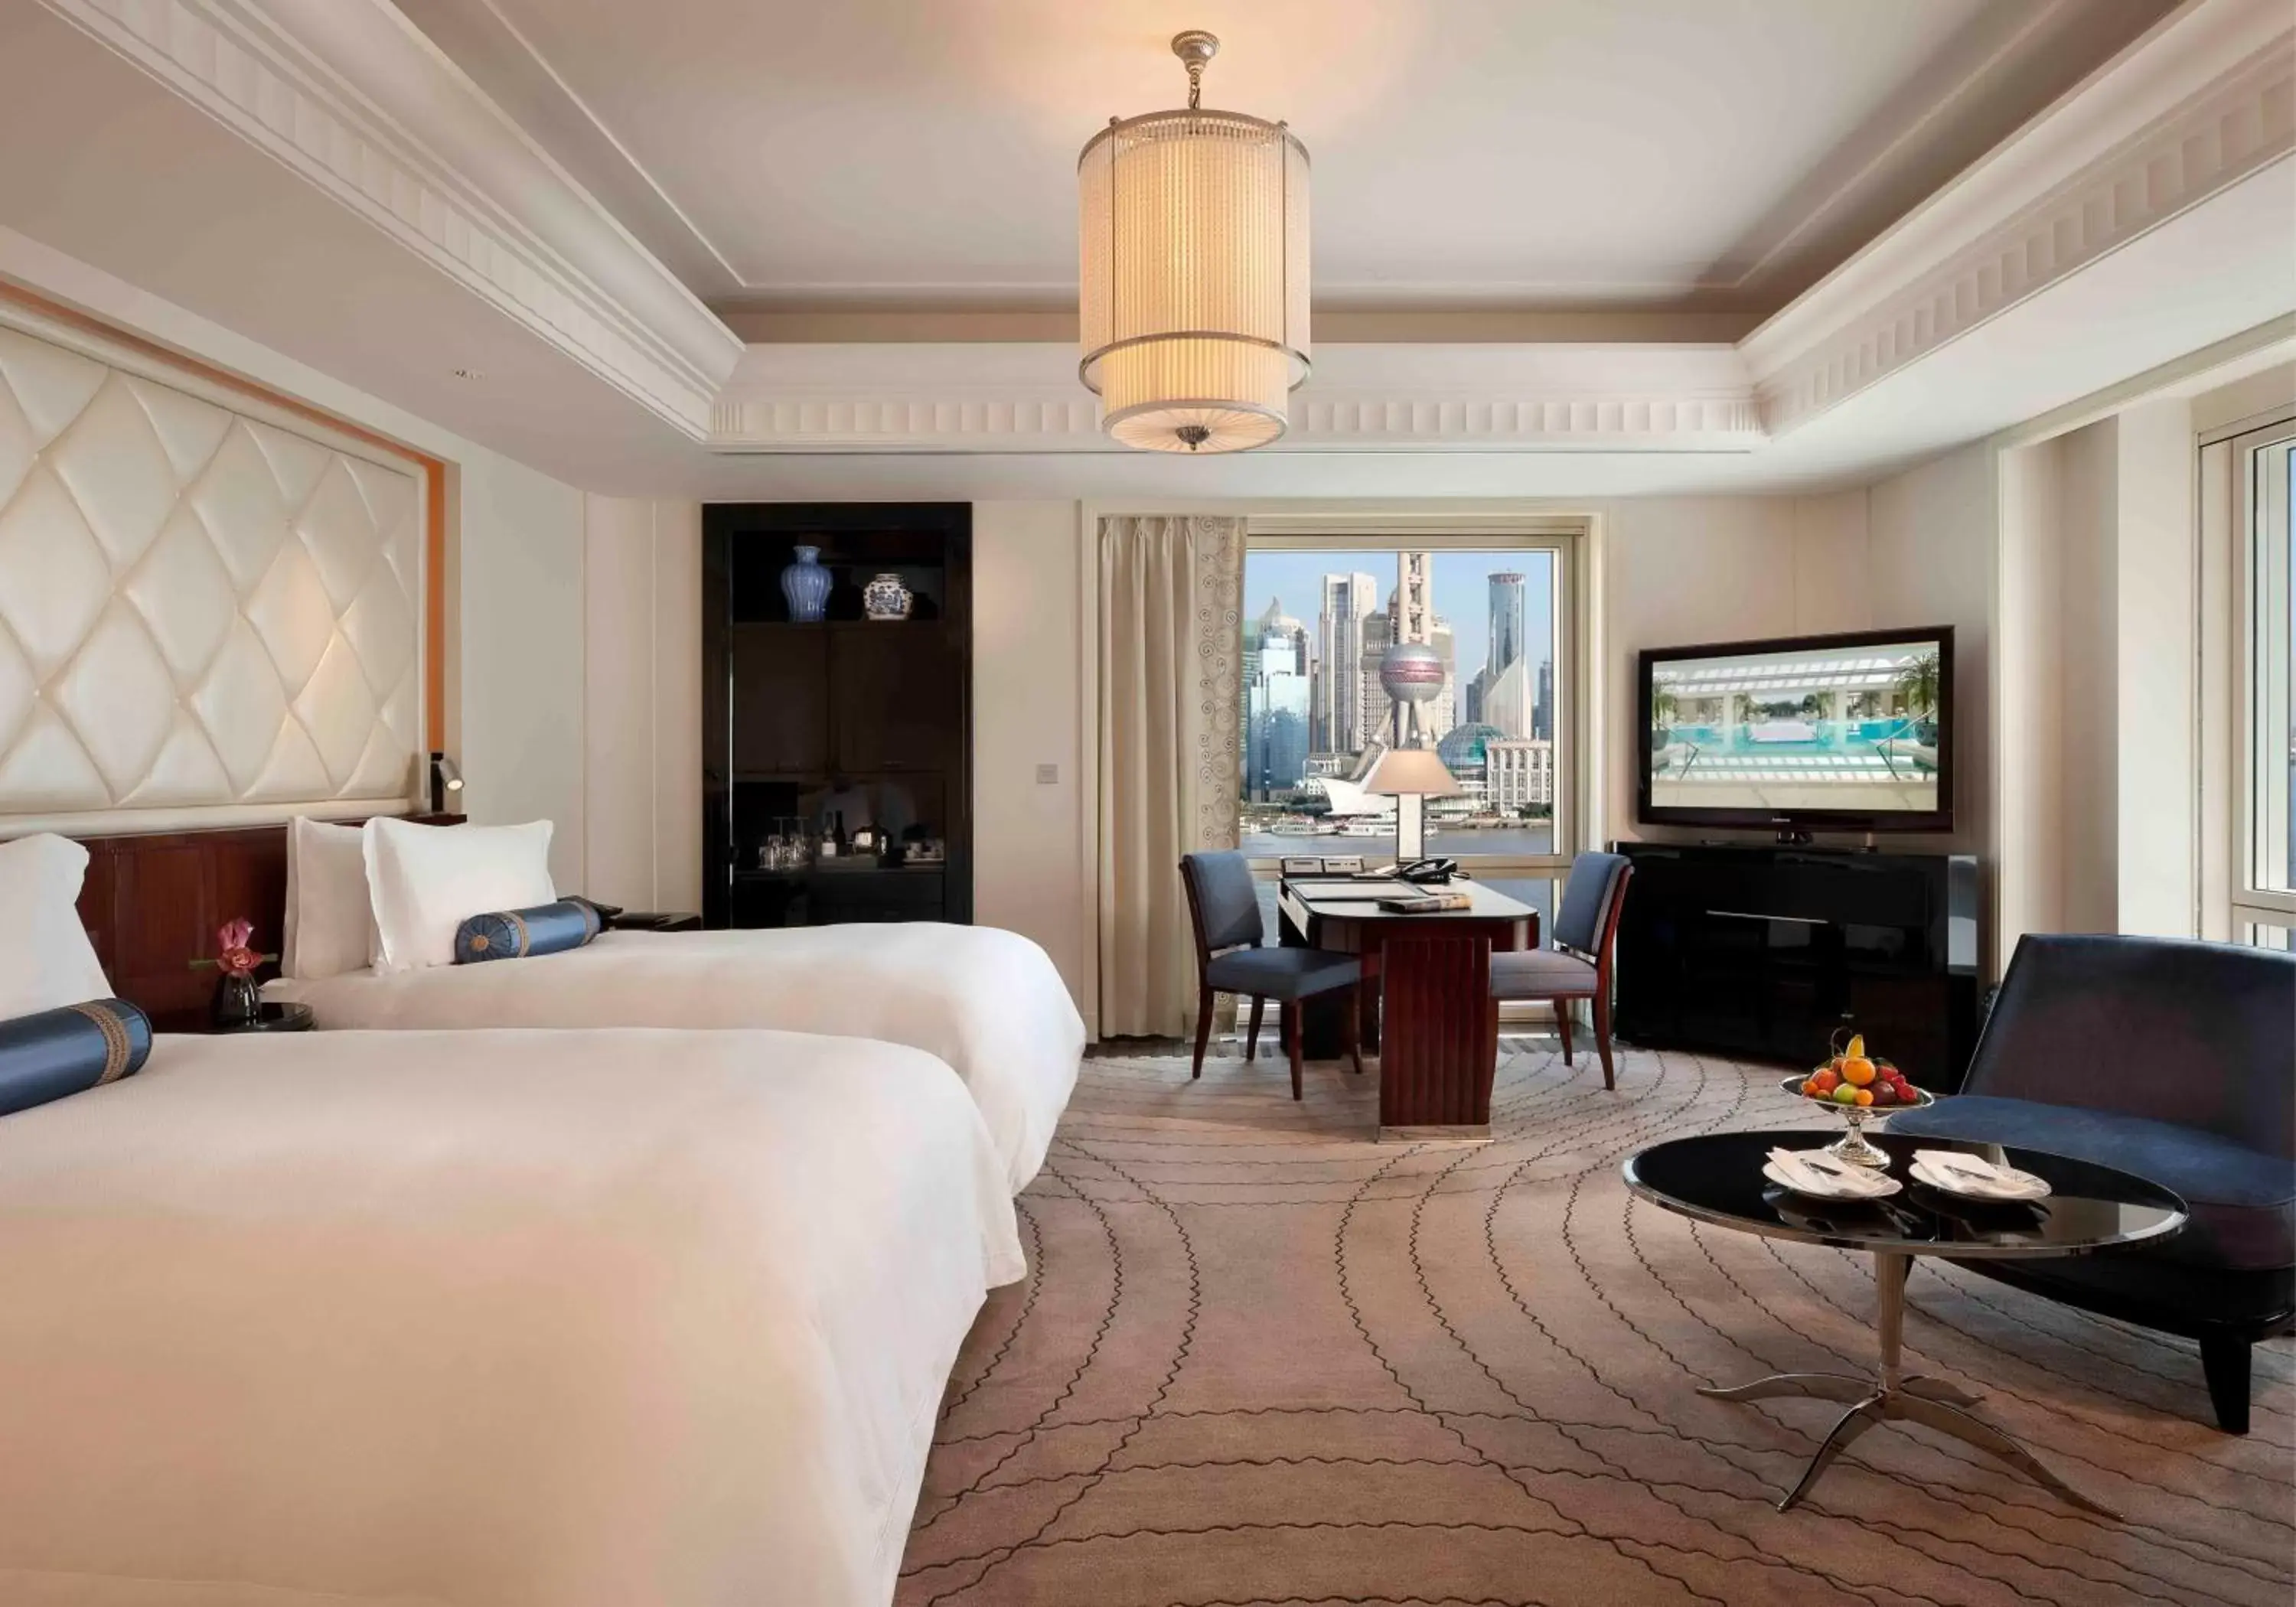 Grand Deluxe River Room in The Peninsula Shanghai